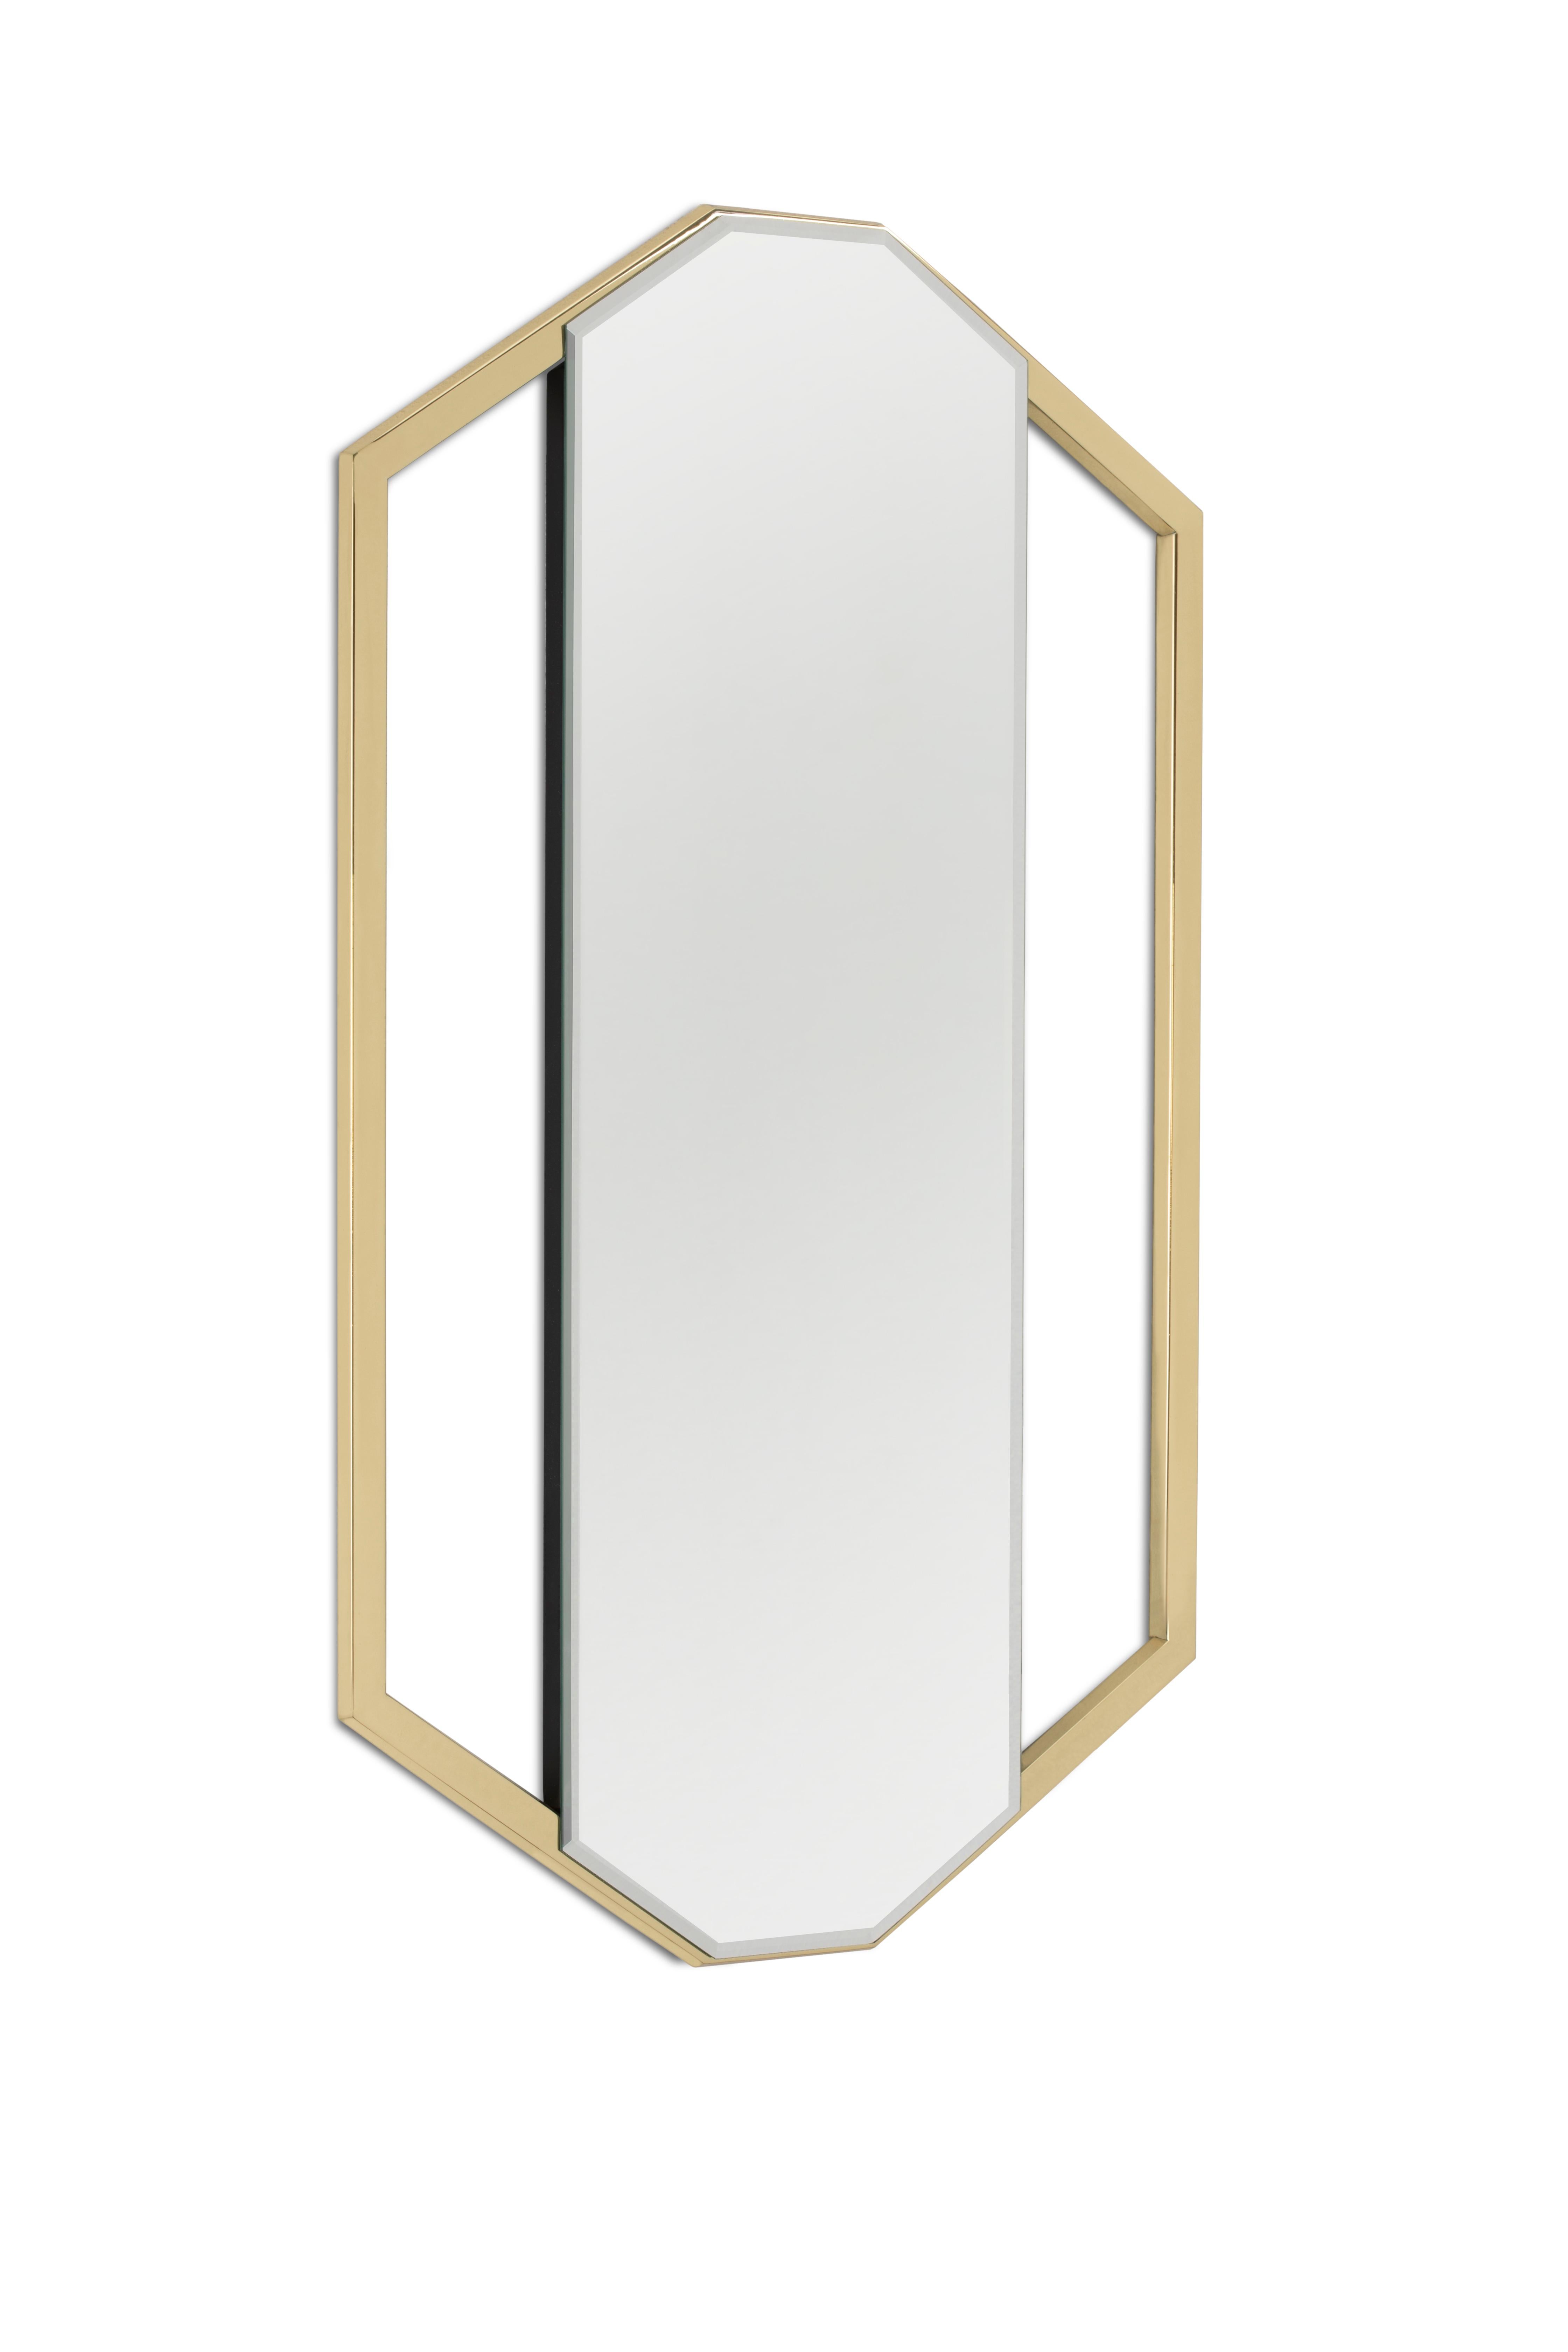 Sapphire mirror gets its name from its resemblance to the blue precious stone: Sapphire. Made out of cornered polished brass this mirror is a versatile piece for luxury bathrooms. It can be displayed in both vertical or horizontal orientation.